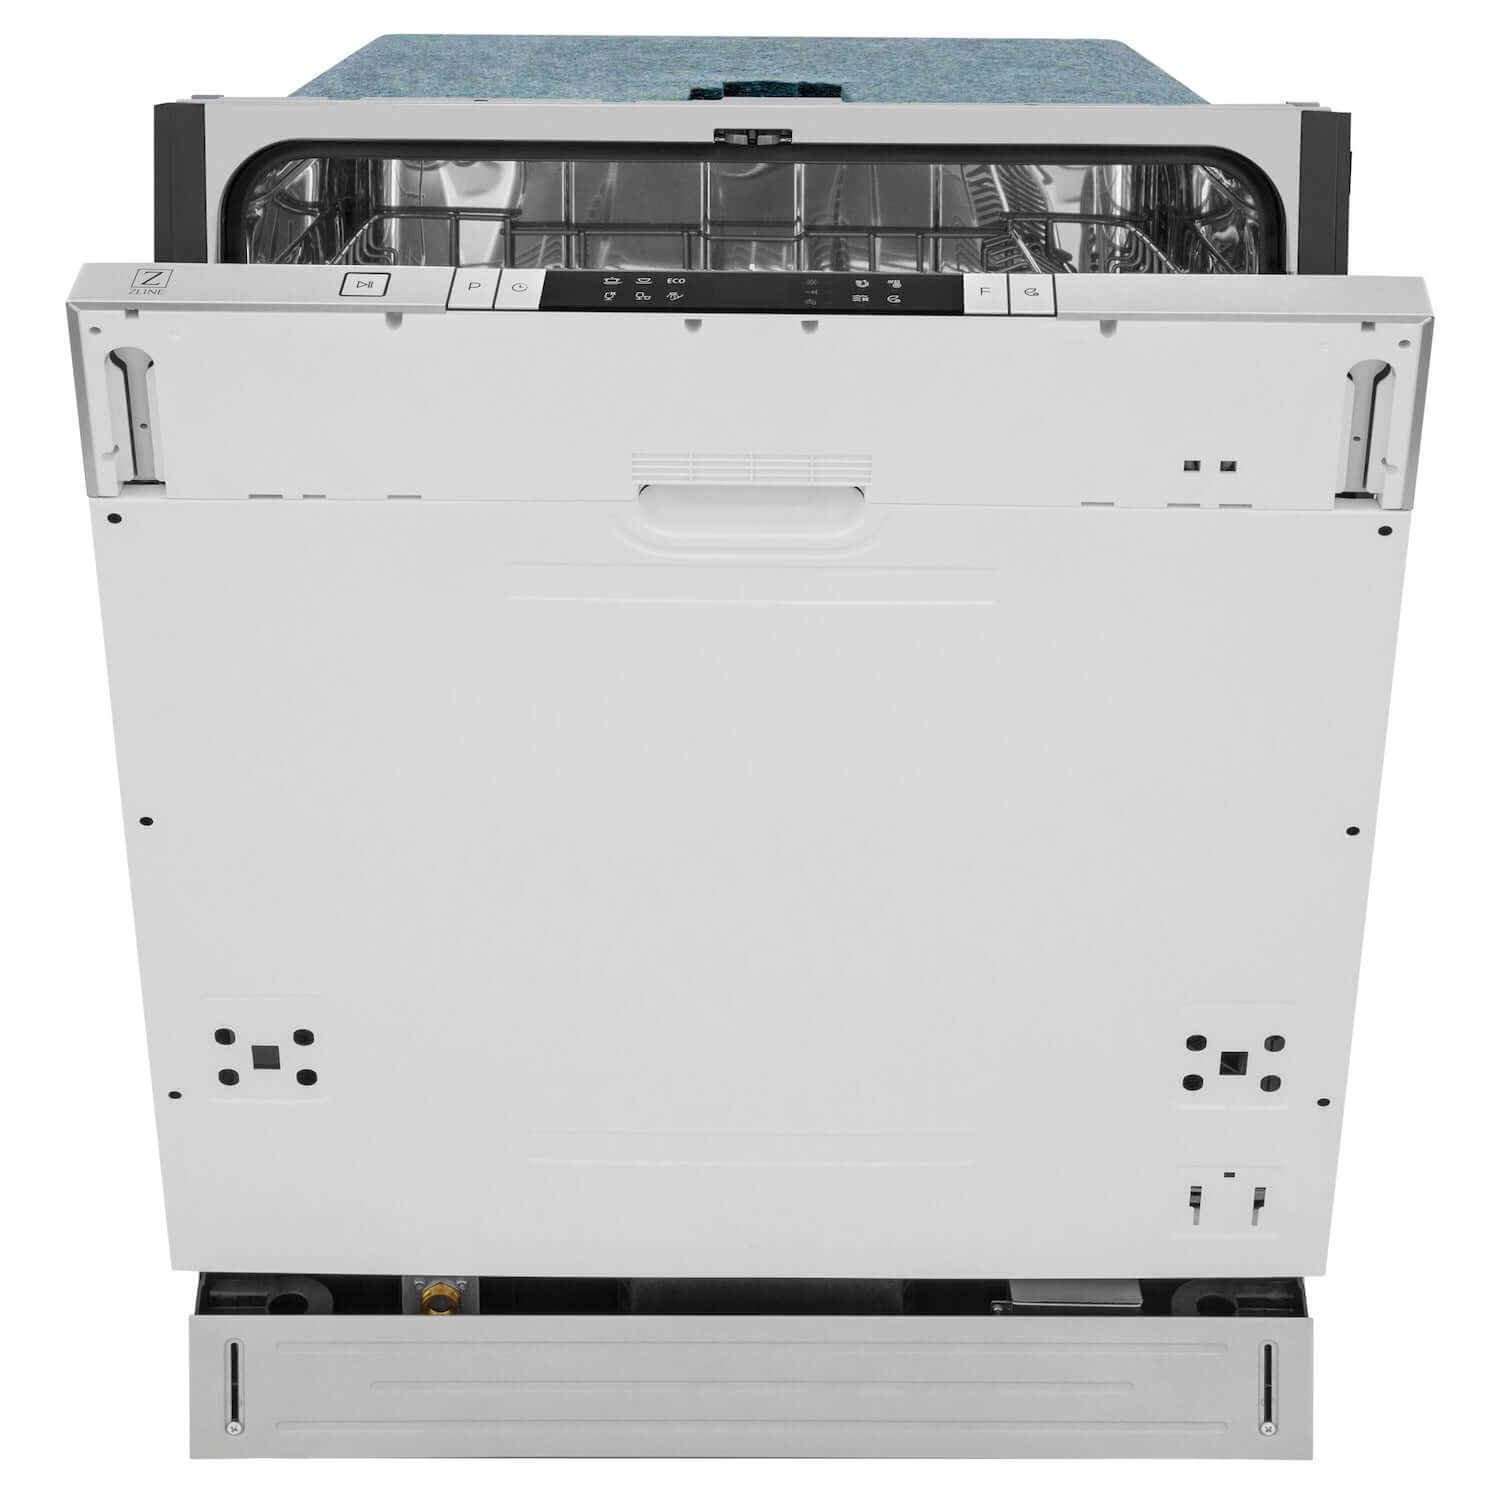 ZLINE 24 in. Panel Ready Top Control Built-In Dishwasher with Stainless Steel Tub, 52dBa (DW7713-24) front, half open.